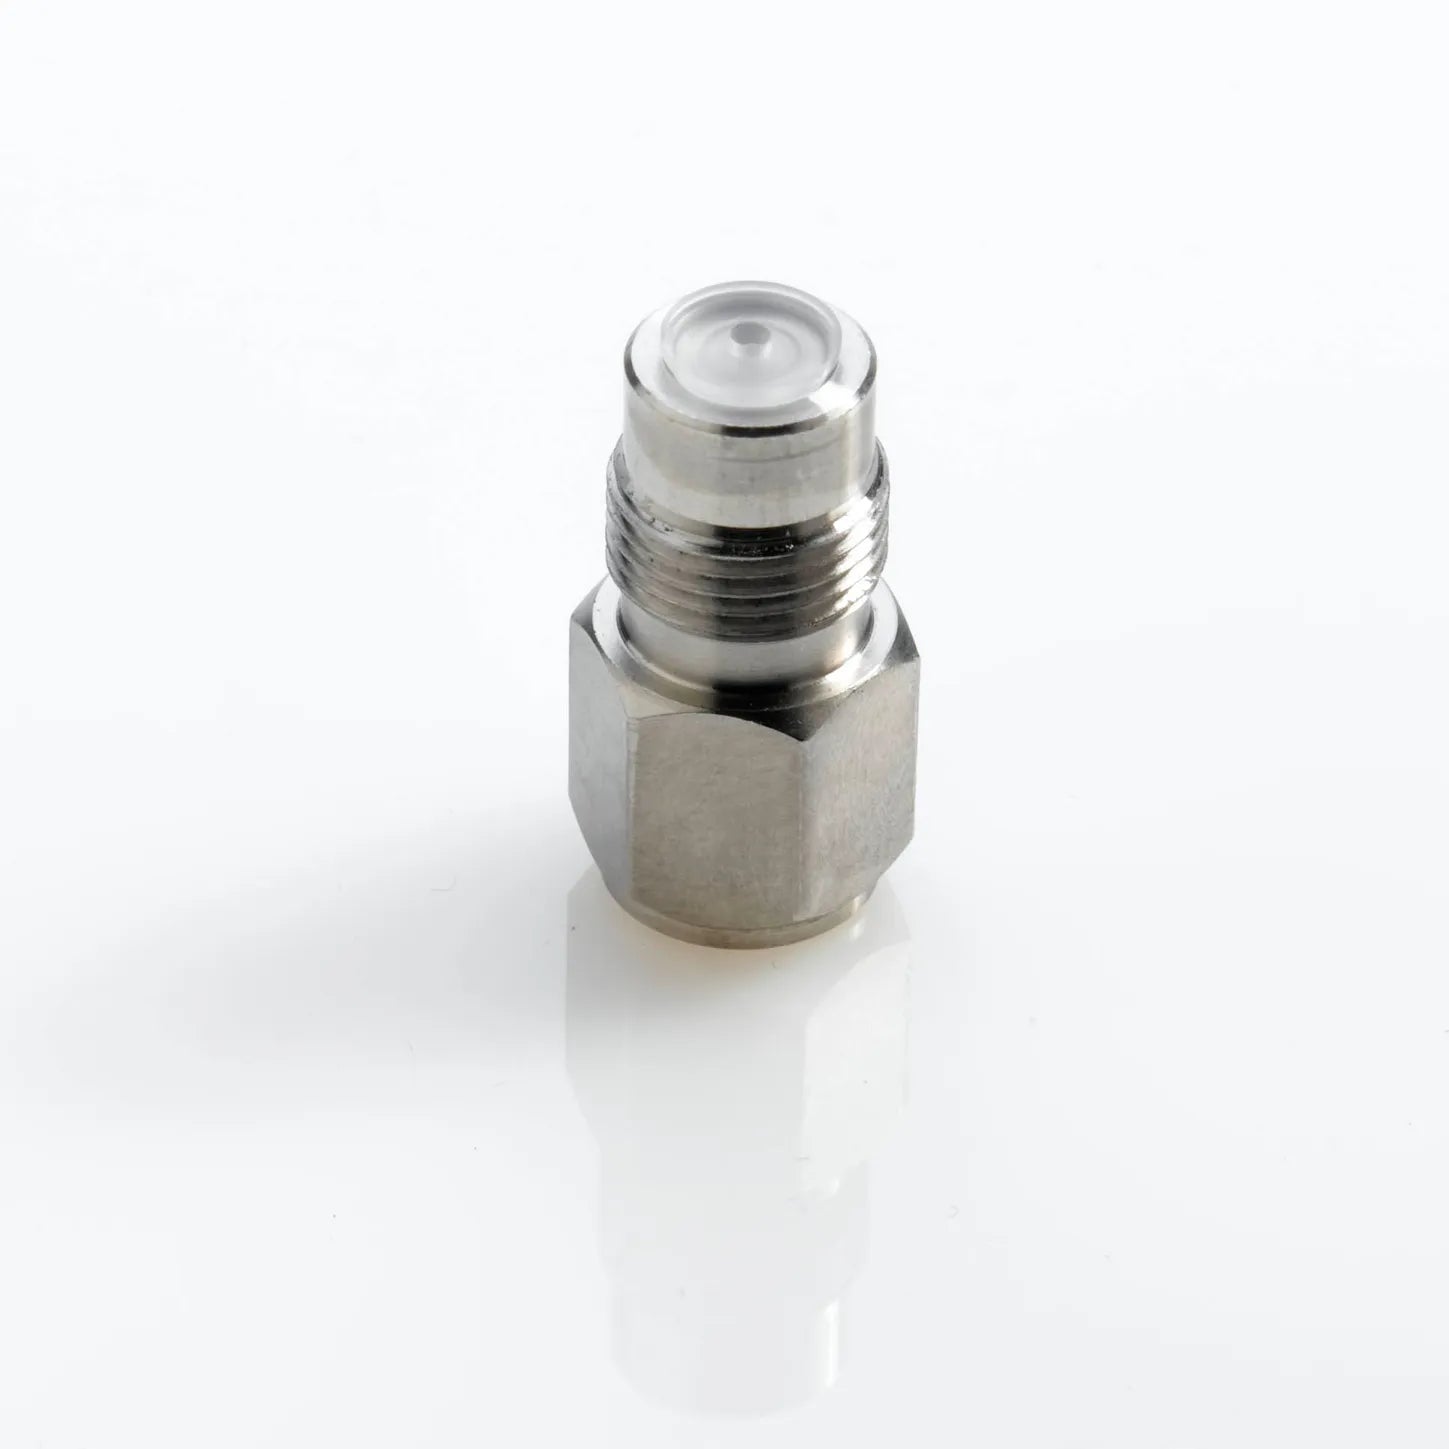 Outlet Check Valve, Comparable to Shimadzu # 228-32531-92, Old# 228-18522-92